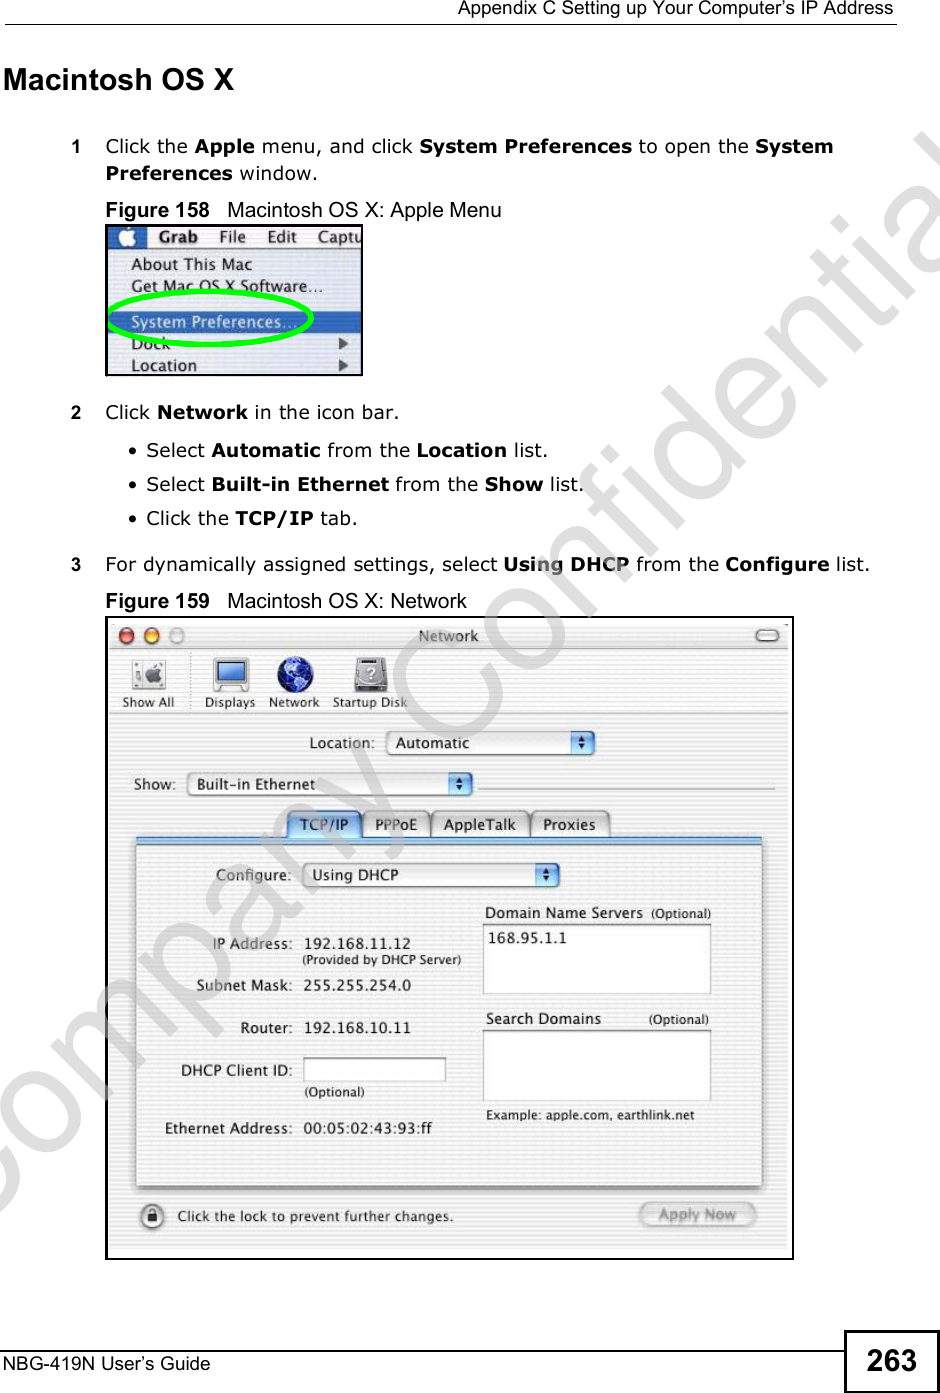  Appendix CSetting up Your Computer s IP AddressNBG-419N User s Guide 263Macintosh OS X1Click the Apple menu, and click System Preferences to open the System Preferences window.Figure 158   Macintosh OS X: Apple Menu2Click Network in the icon bar.    Select Automatic from the Location list. Select Built-in Ethernet from the Show list.  Click the TCP/IP tab.3For dynamically assigned settings, select Using DHCP from the Configure list.Figure 159   Macintosh OS X: NetworkCompany Confidential